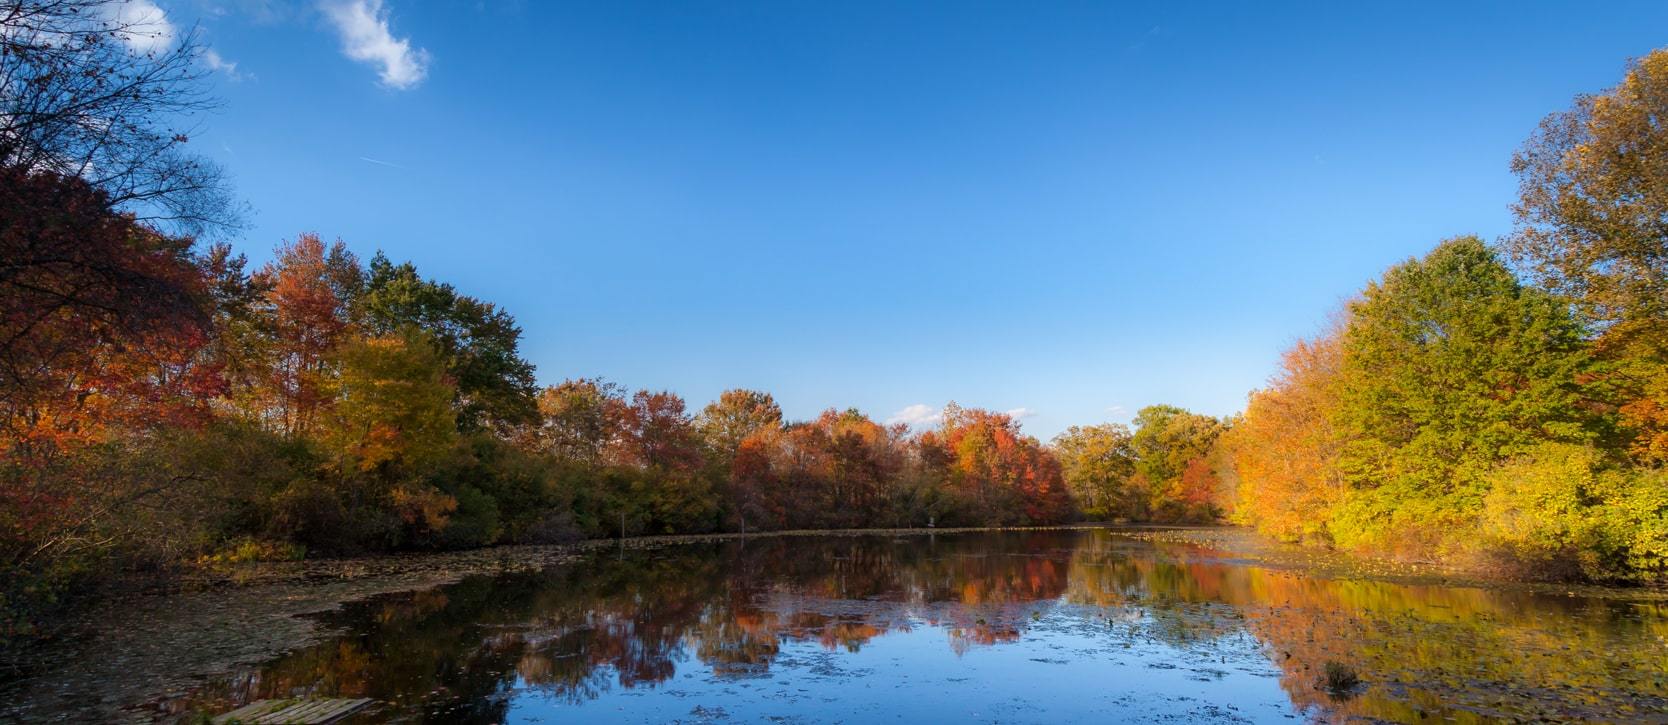 Great Swamp National Wildlife Refuge in Chatham Township, New Jersey